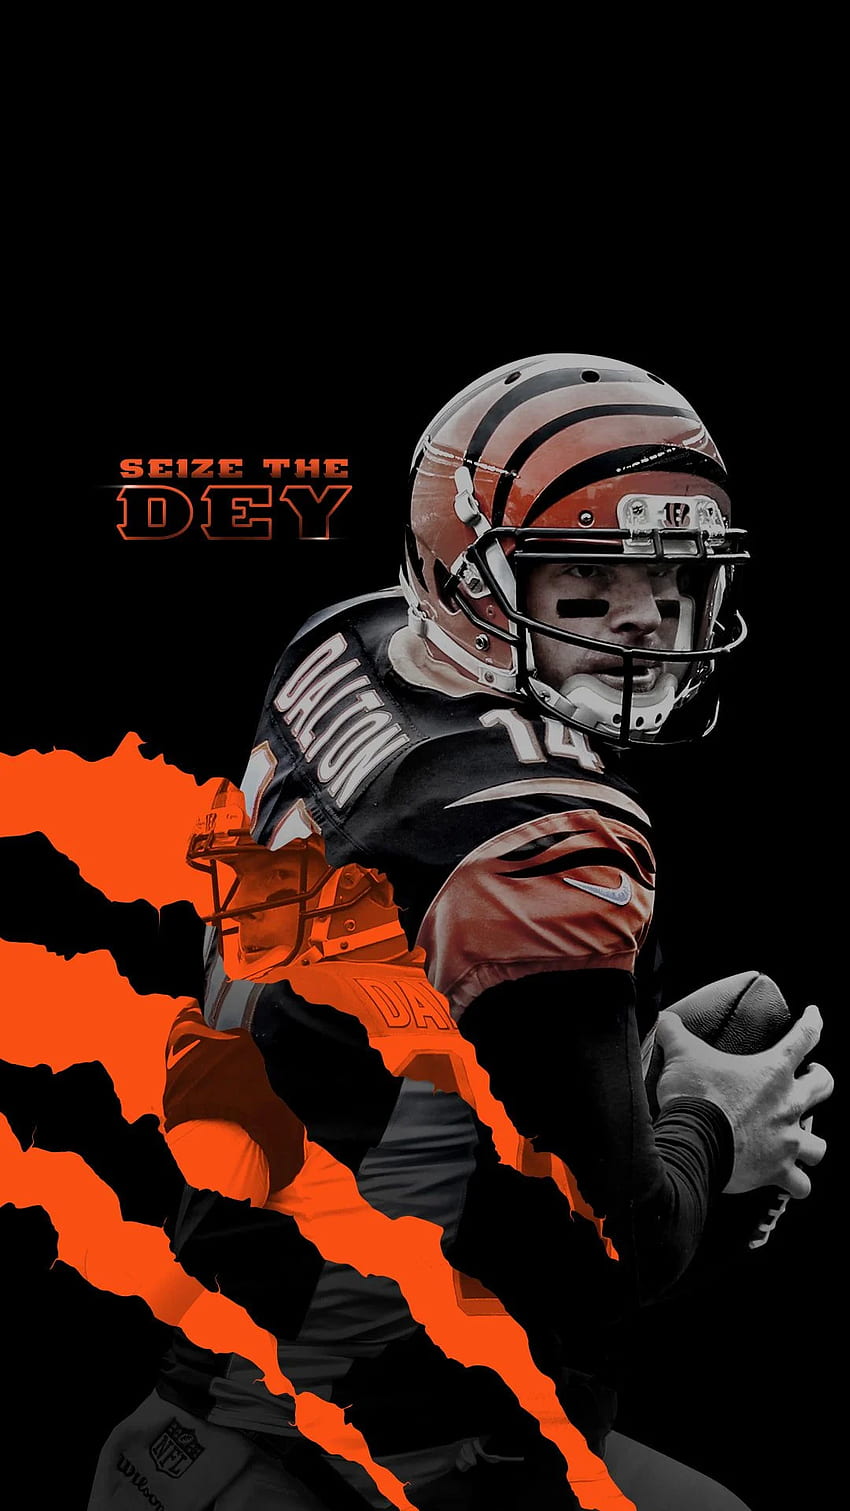 high quality wallpapers football bengalsTikTok Search